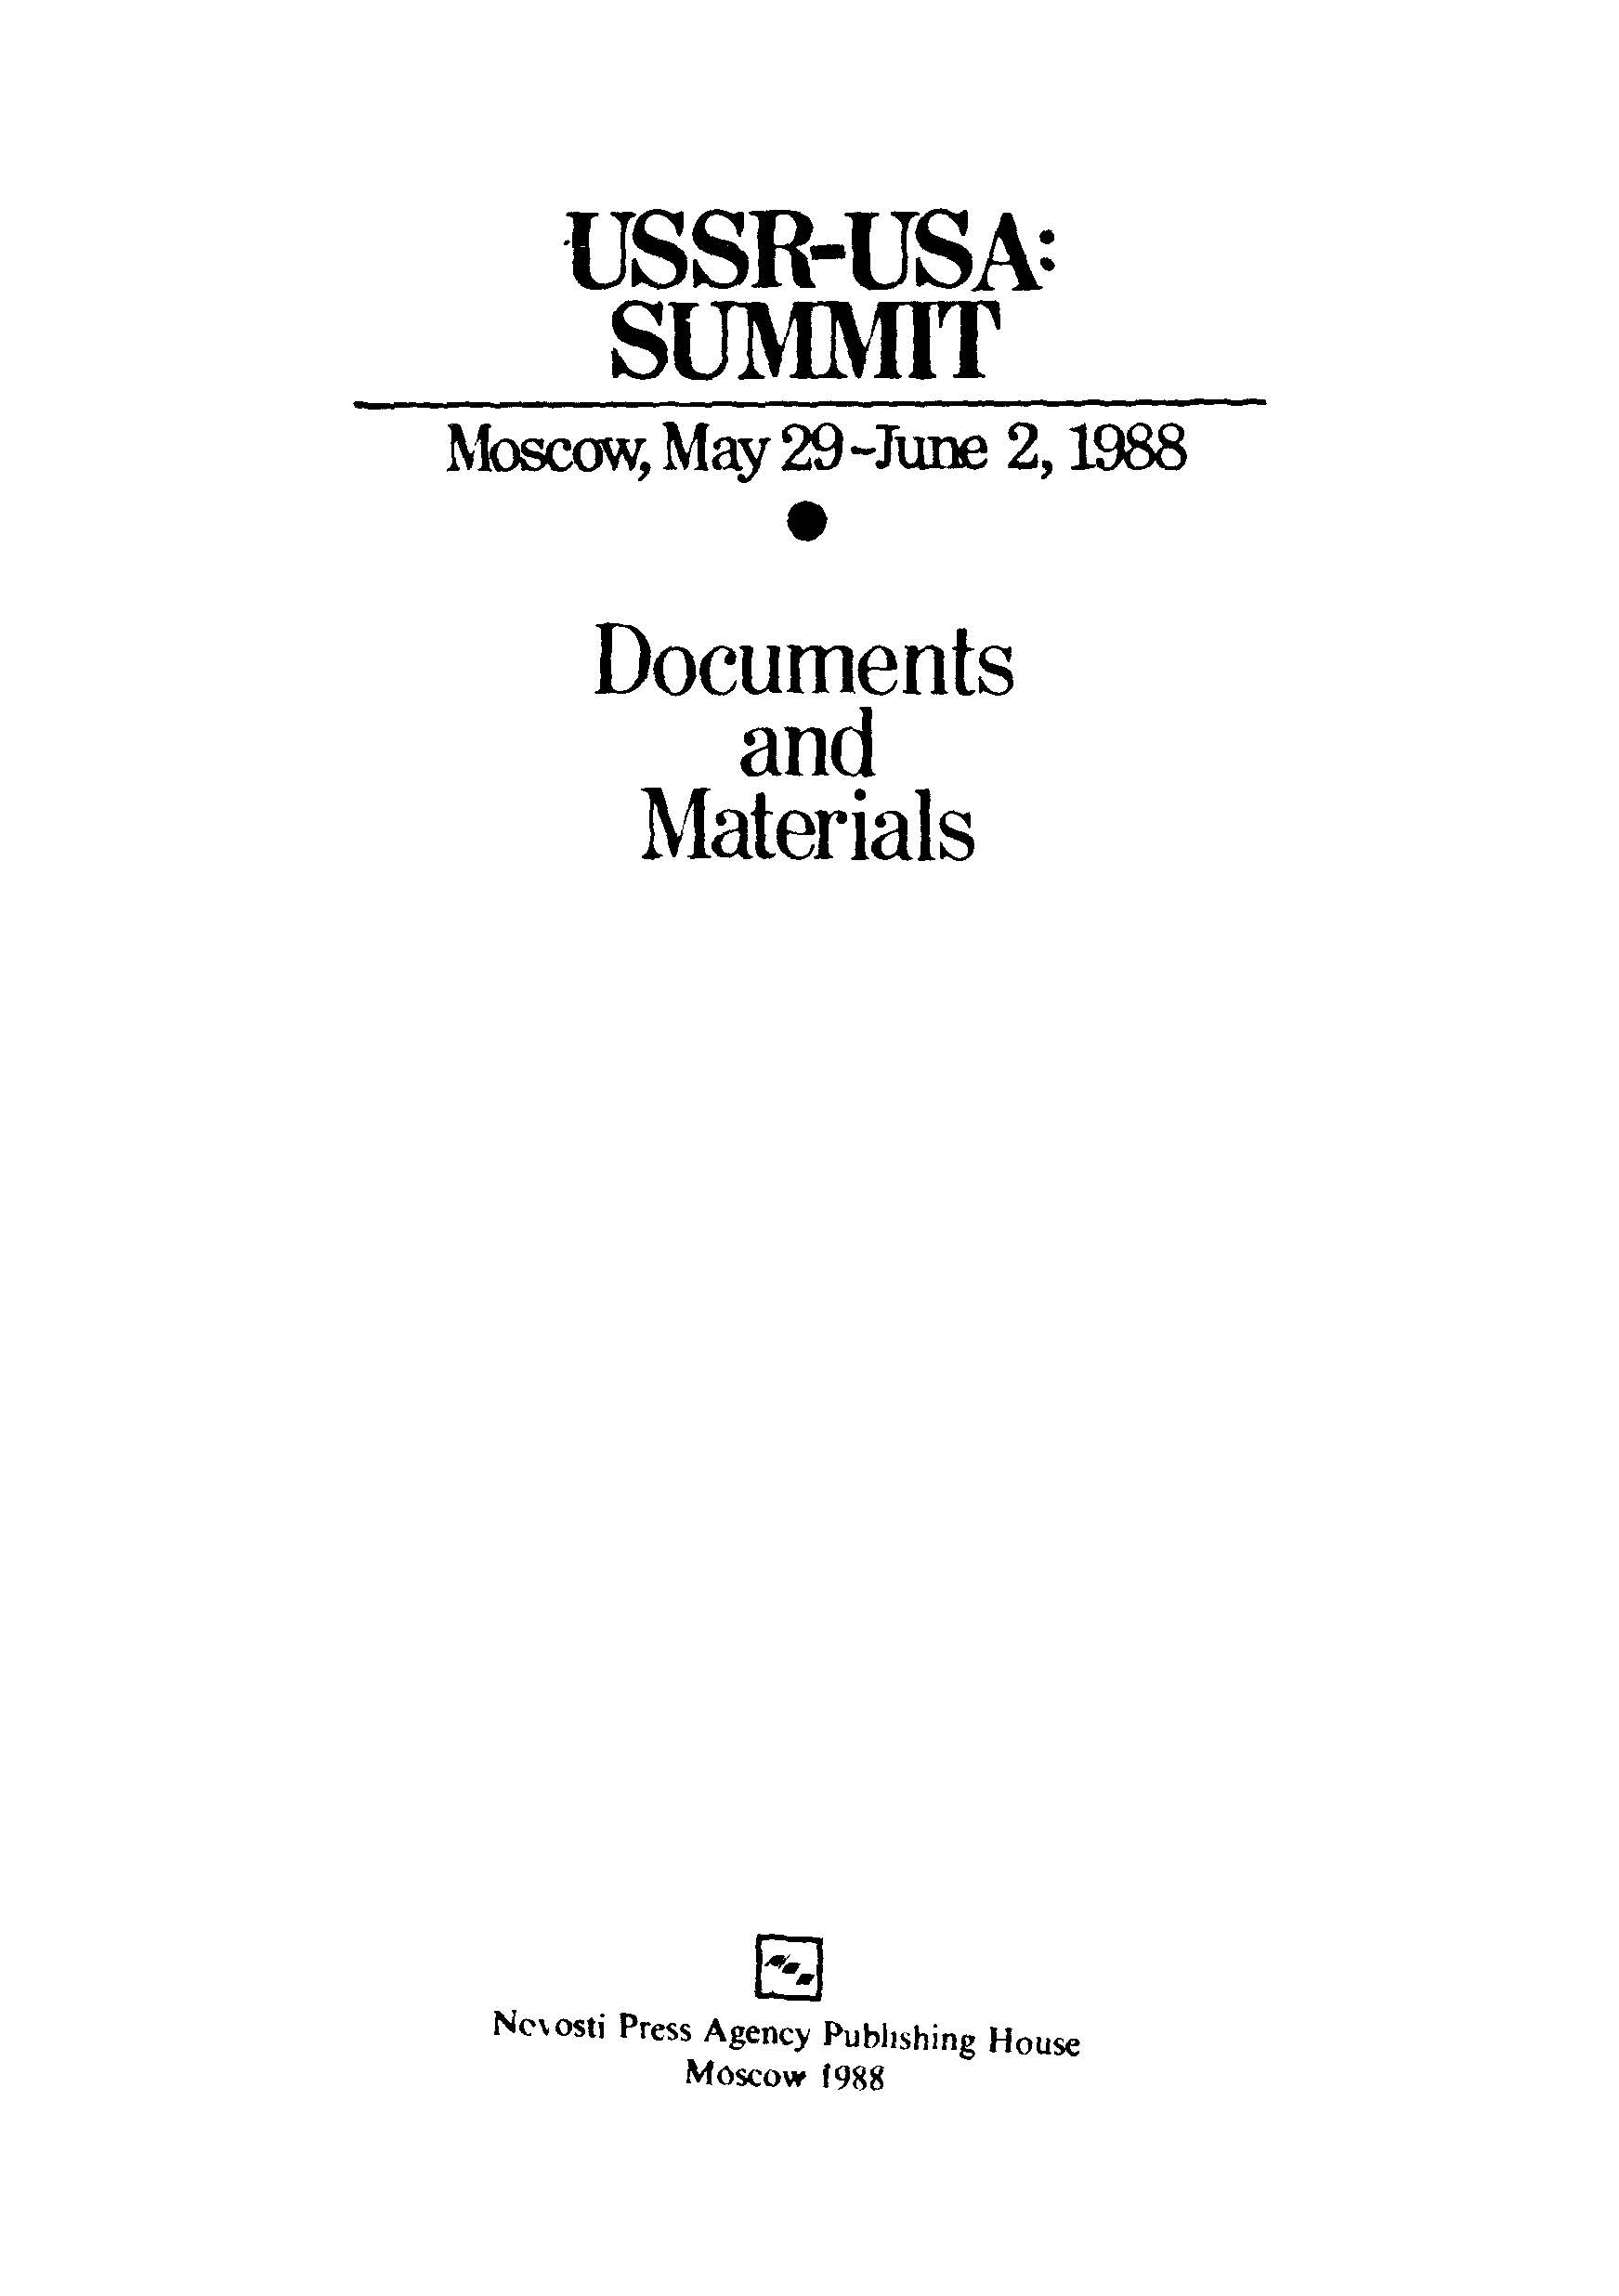 USSR-USA:summit (moscow,may 29-june 2, 1988) documents and material